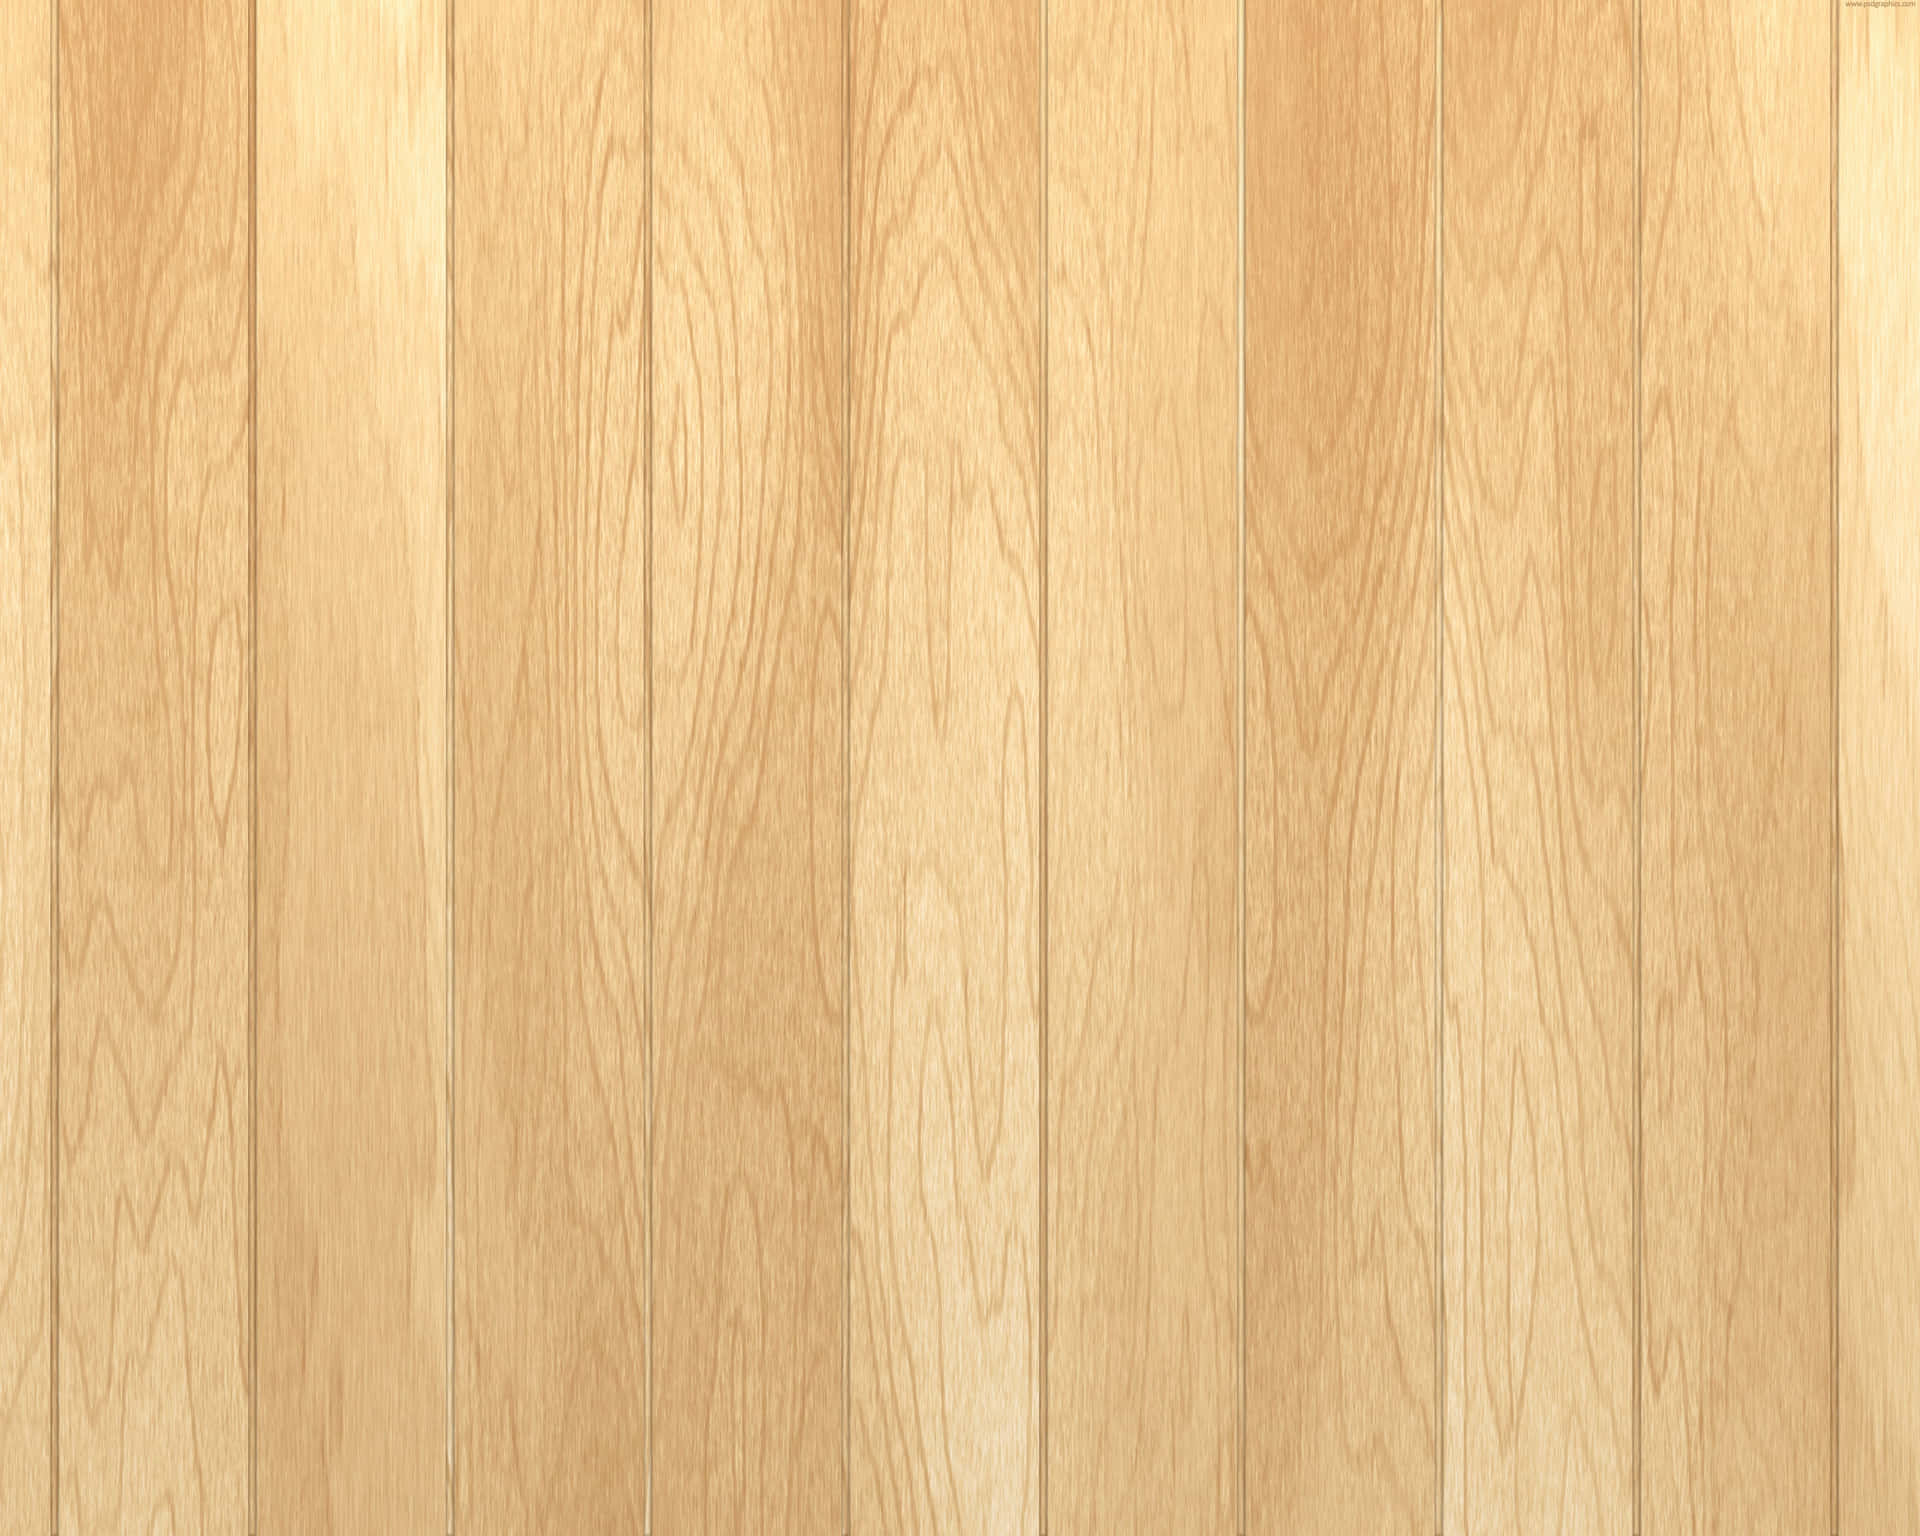 Download Light Wood Background | Wallpapers.com